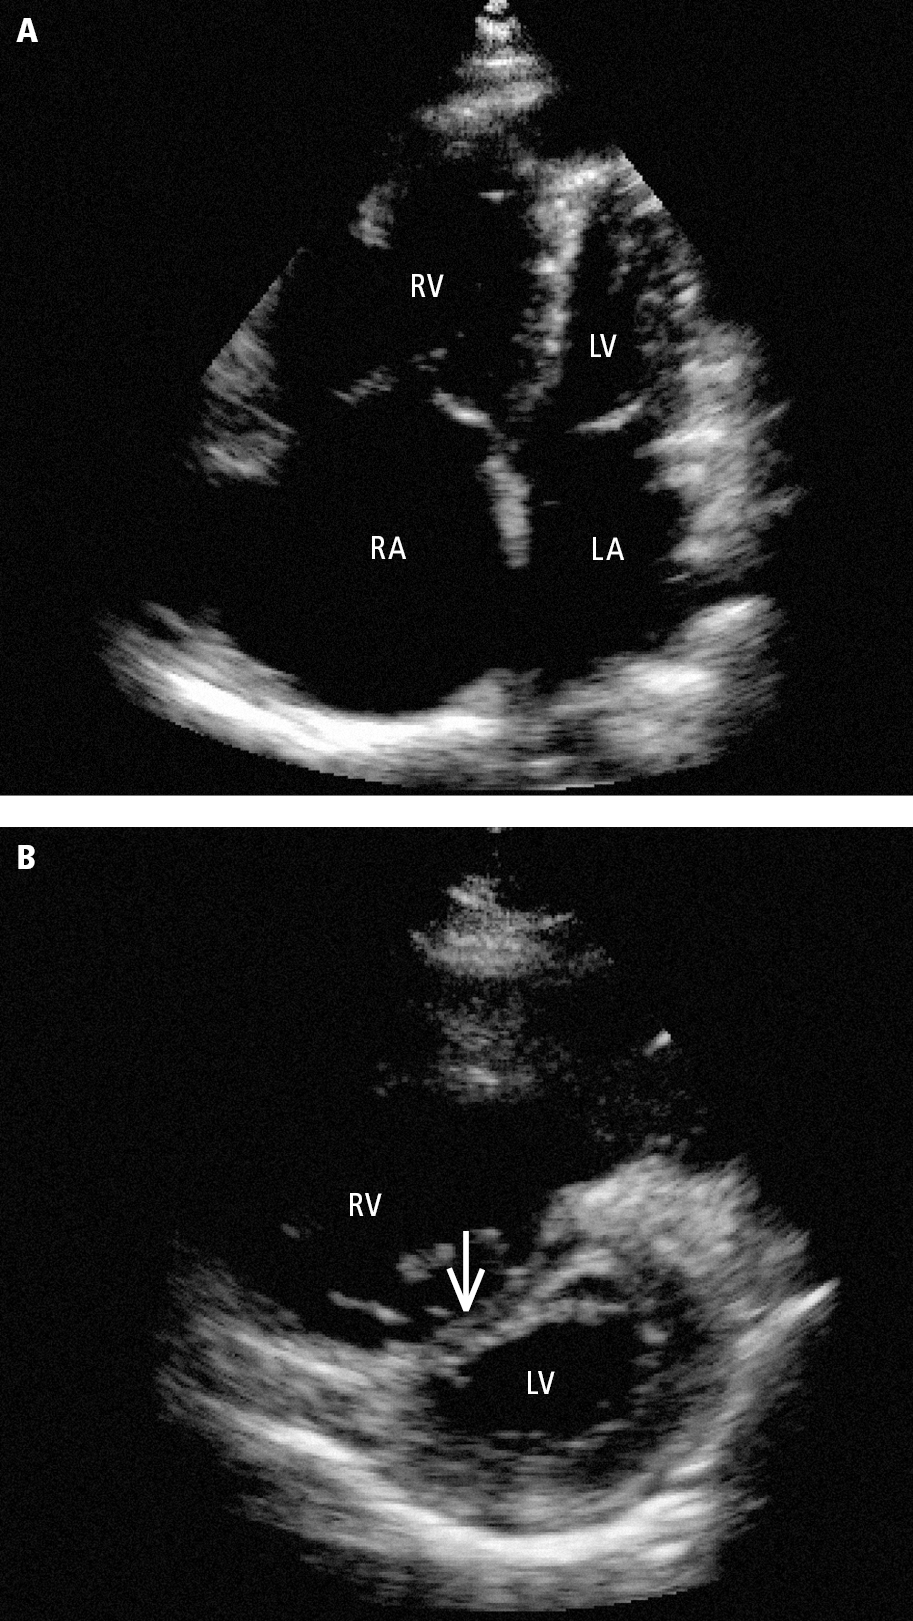 Figure 031_6901.  Transthoracic echocardiography (TTE) of right ventricular overload in a patient with pulmonary embolism:   A  , an enlarged right ventricle dominating the left ventricle seen in the apical 4-chamber view;   B  , flattened interventricular septum (arrow) seen in the parasternal short-axis view. LA, left atrium; LV, left ventricle; RA, right atrium RV; right ventricle. 